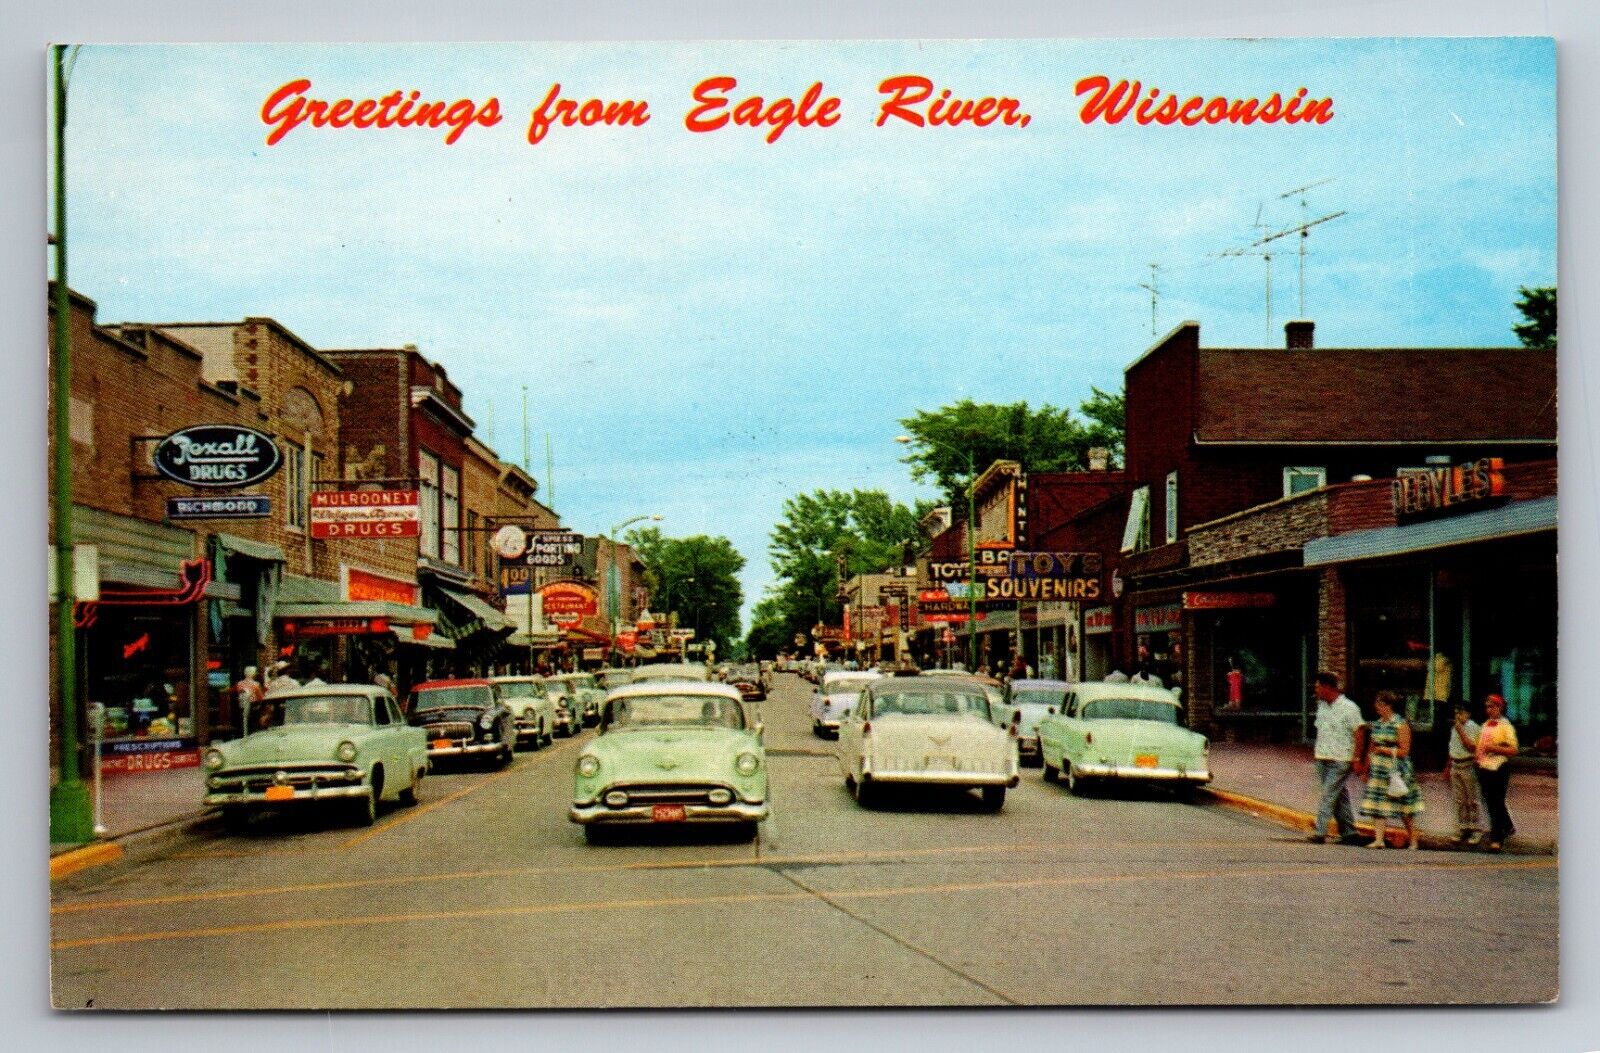 Greetings From Eagle River Wisconsin Vintage Posted 1959 Postcard Street Scene